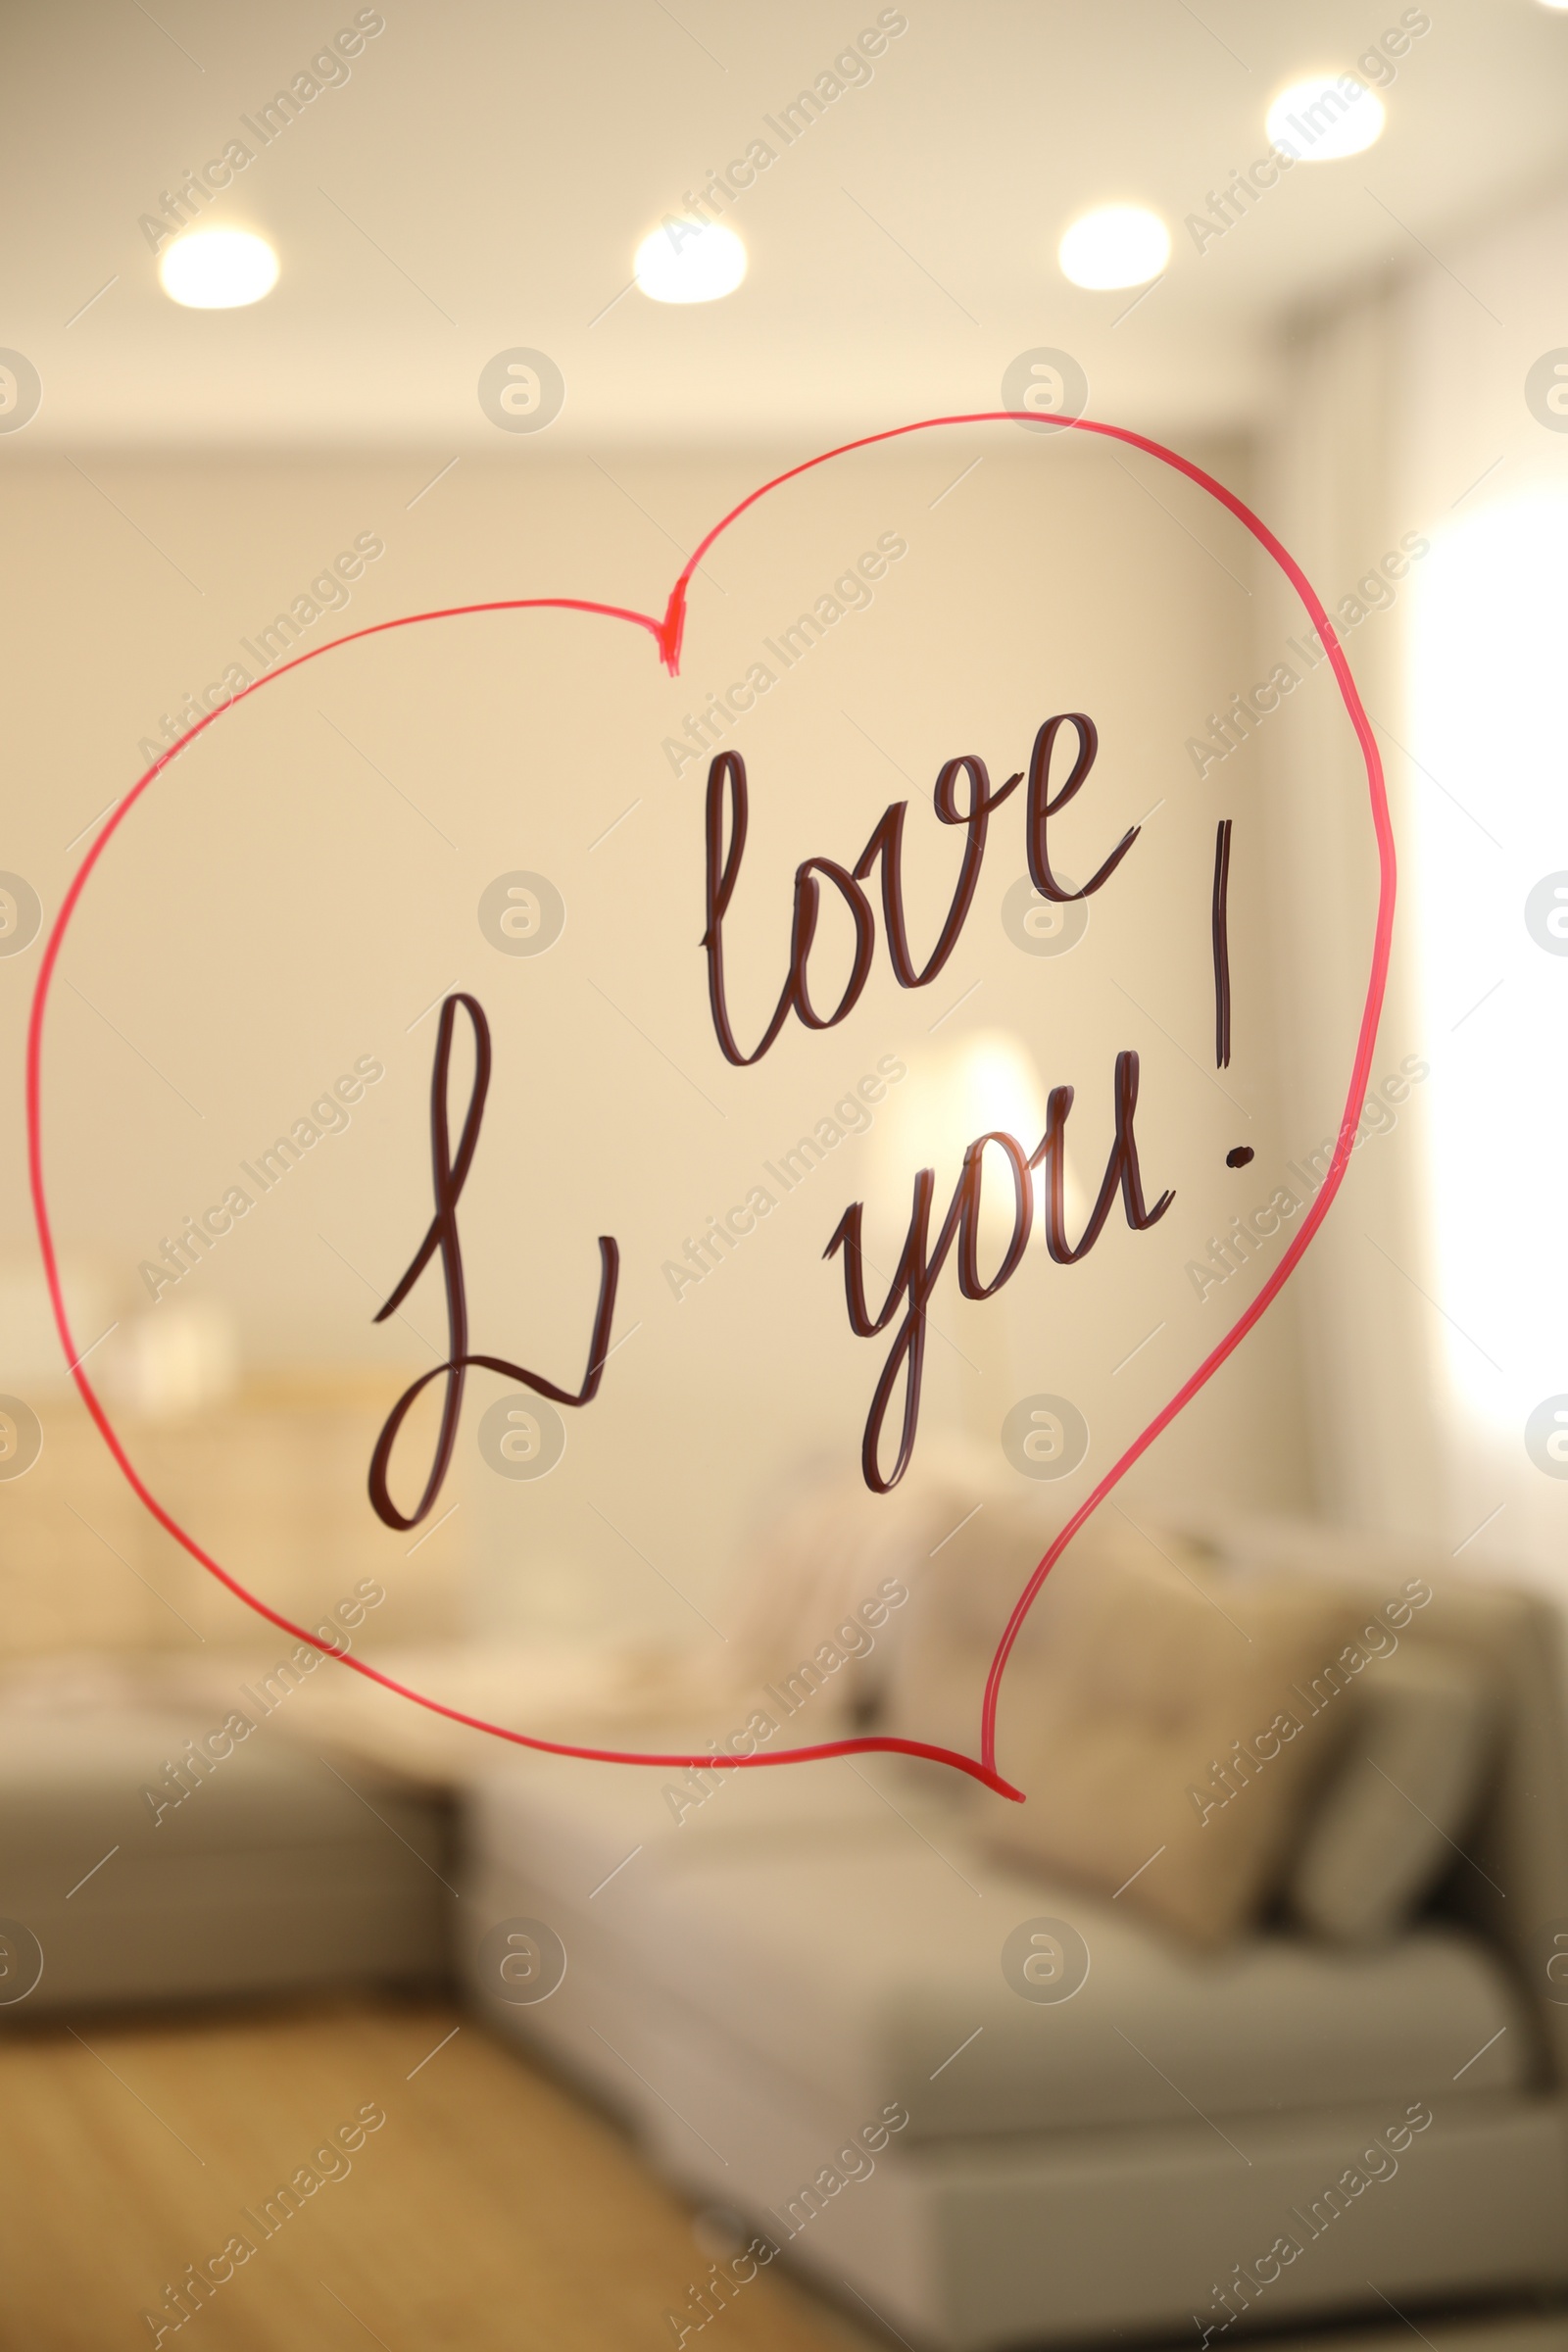 Photo of Drawn red heart with handwritten text I Love You on mirror in room. Romantic message